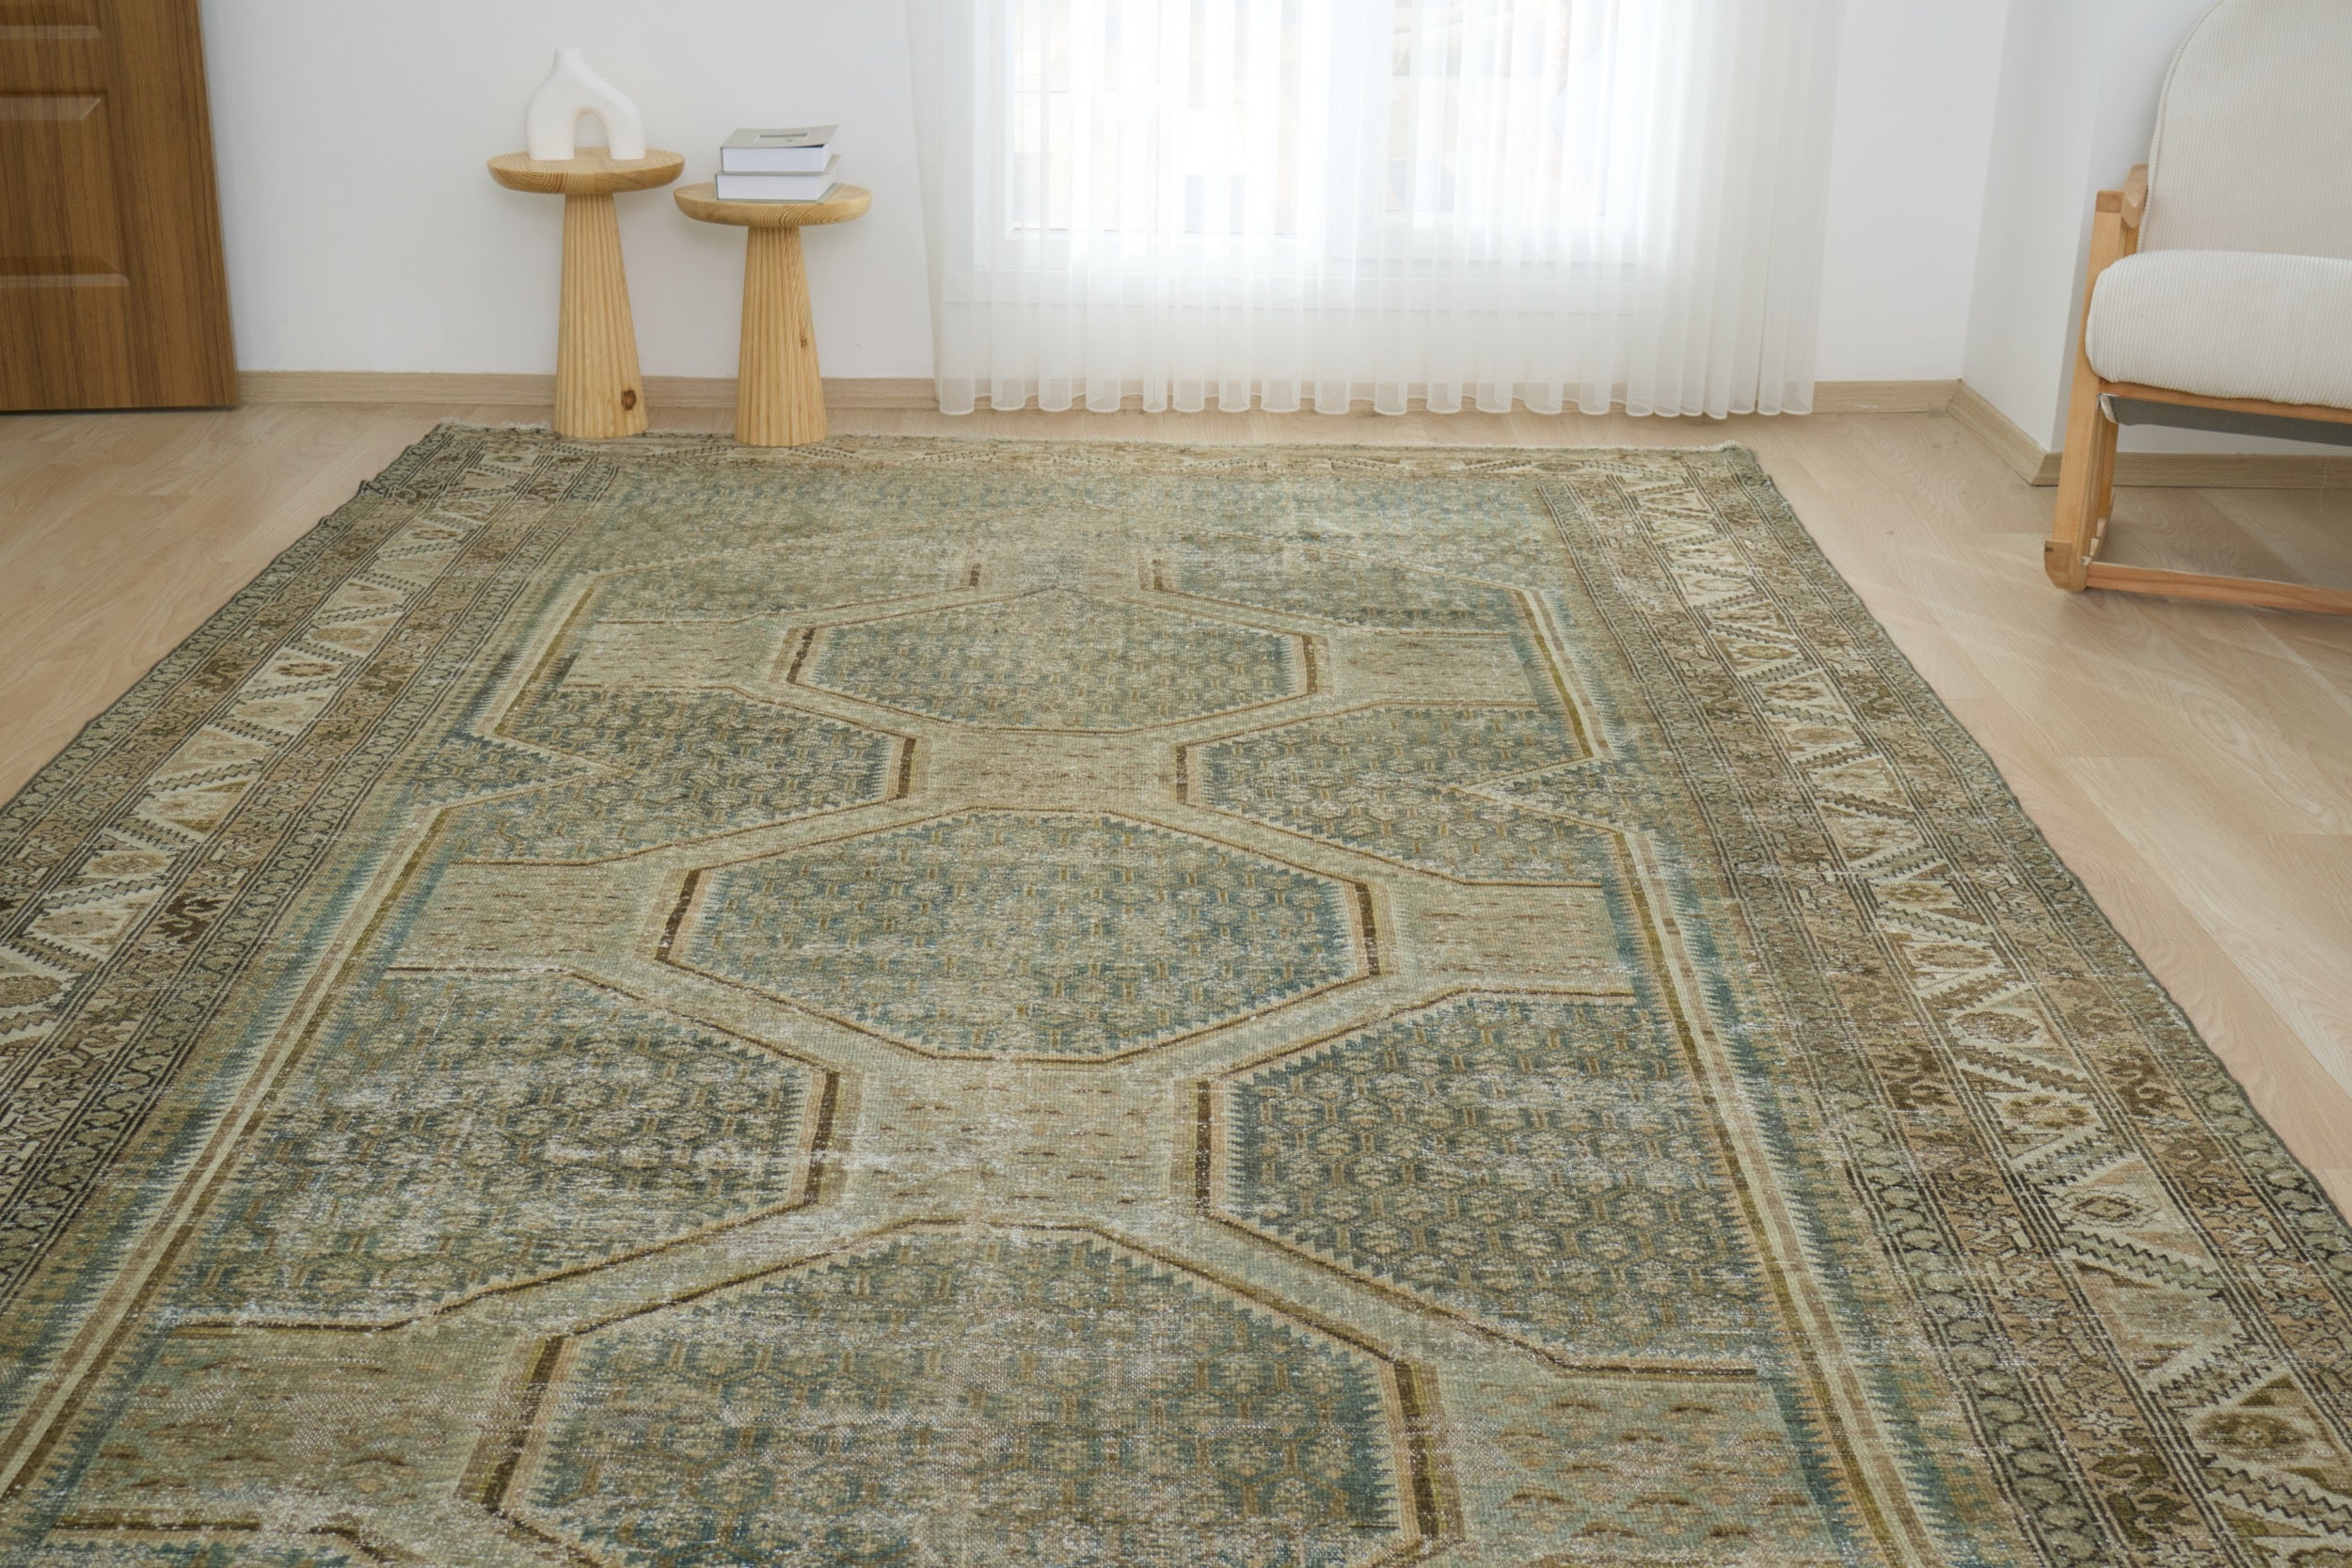 Nansee - The Epitome of Rug Artistry | Kuden Rugs